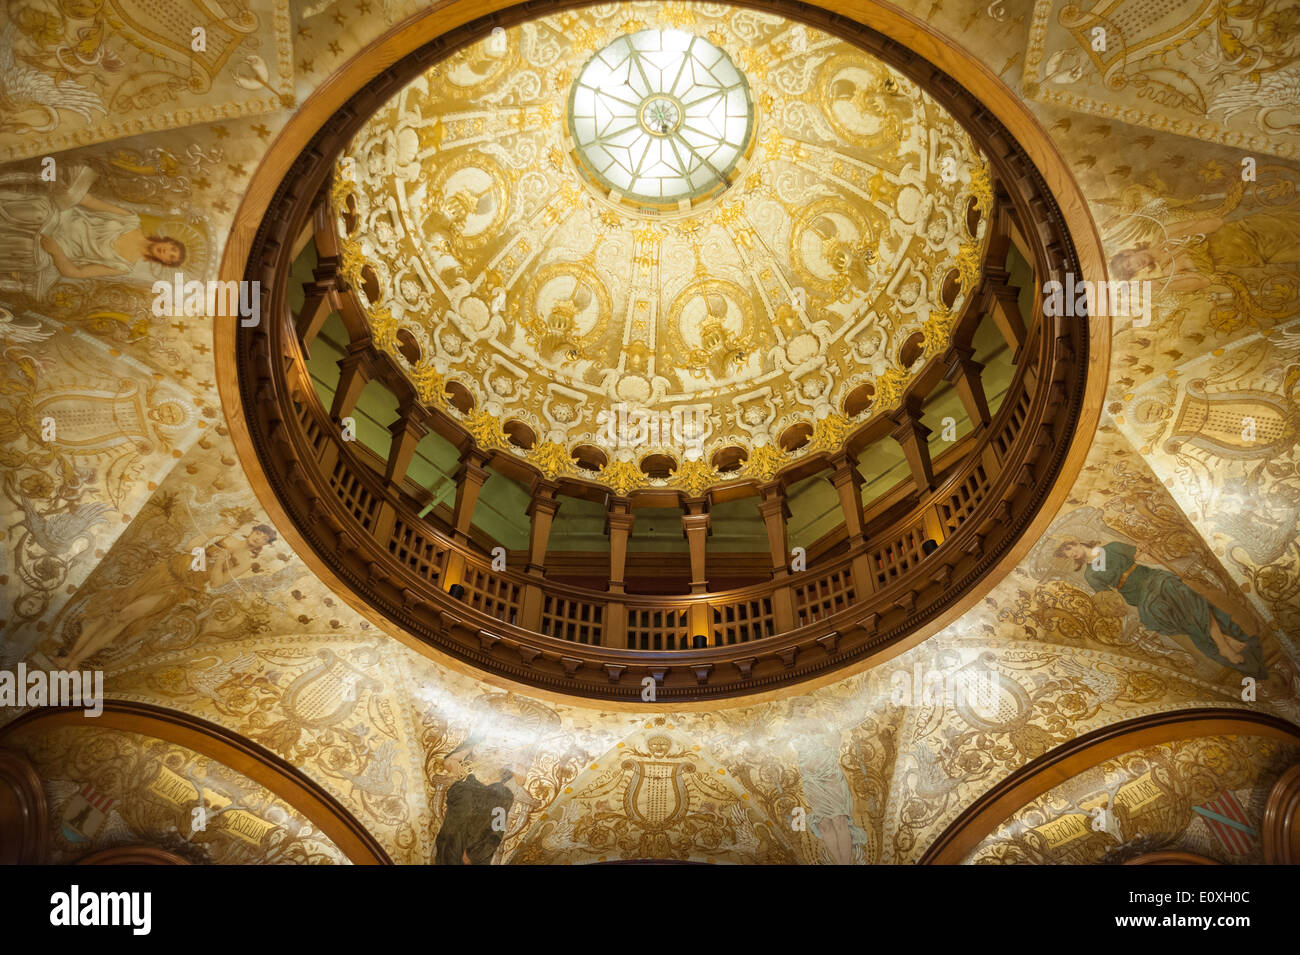 Dome ceiling of the Spanish Renaissance style atrium at Flagler College (formerly the Ponce de Leon Hotel) in St. Augustine, FL. Stock Photo